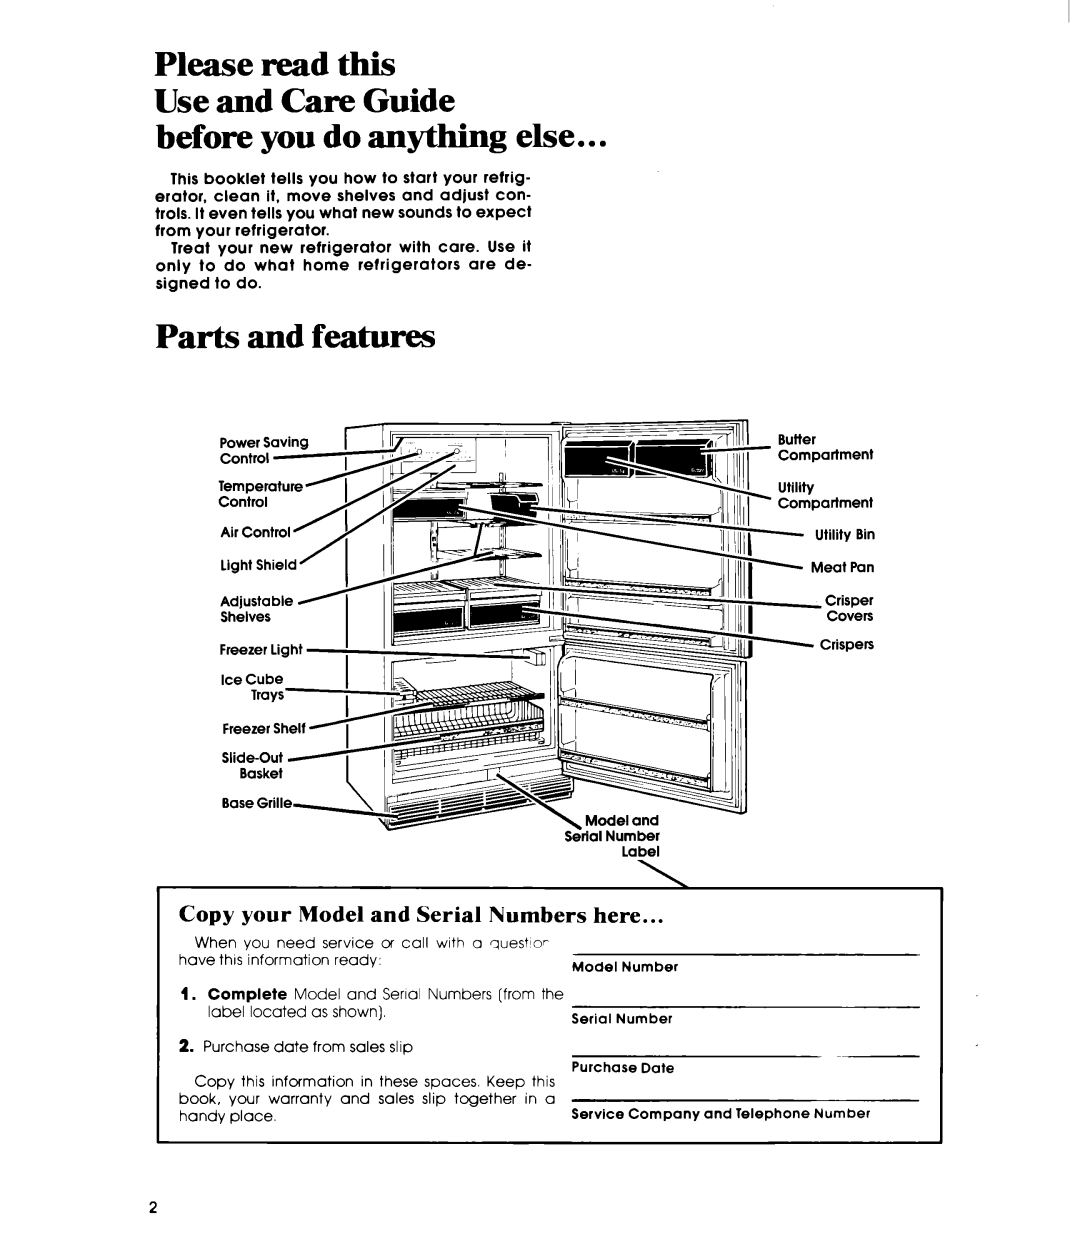 Whirlpool EB19ZK manual before you do anything else, Parts and features, Please read this Use and Care Guide 